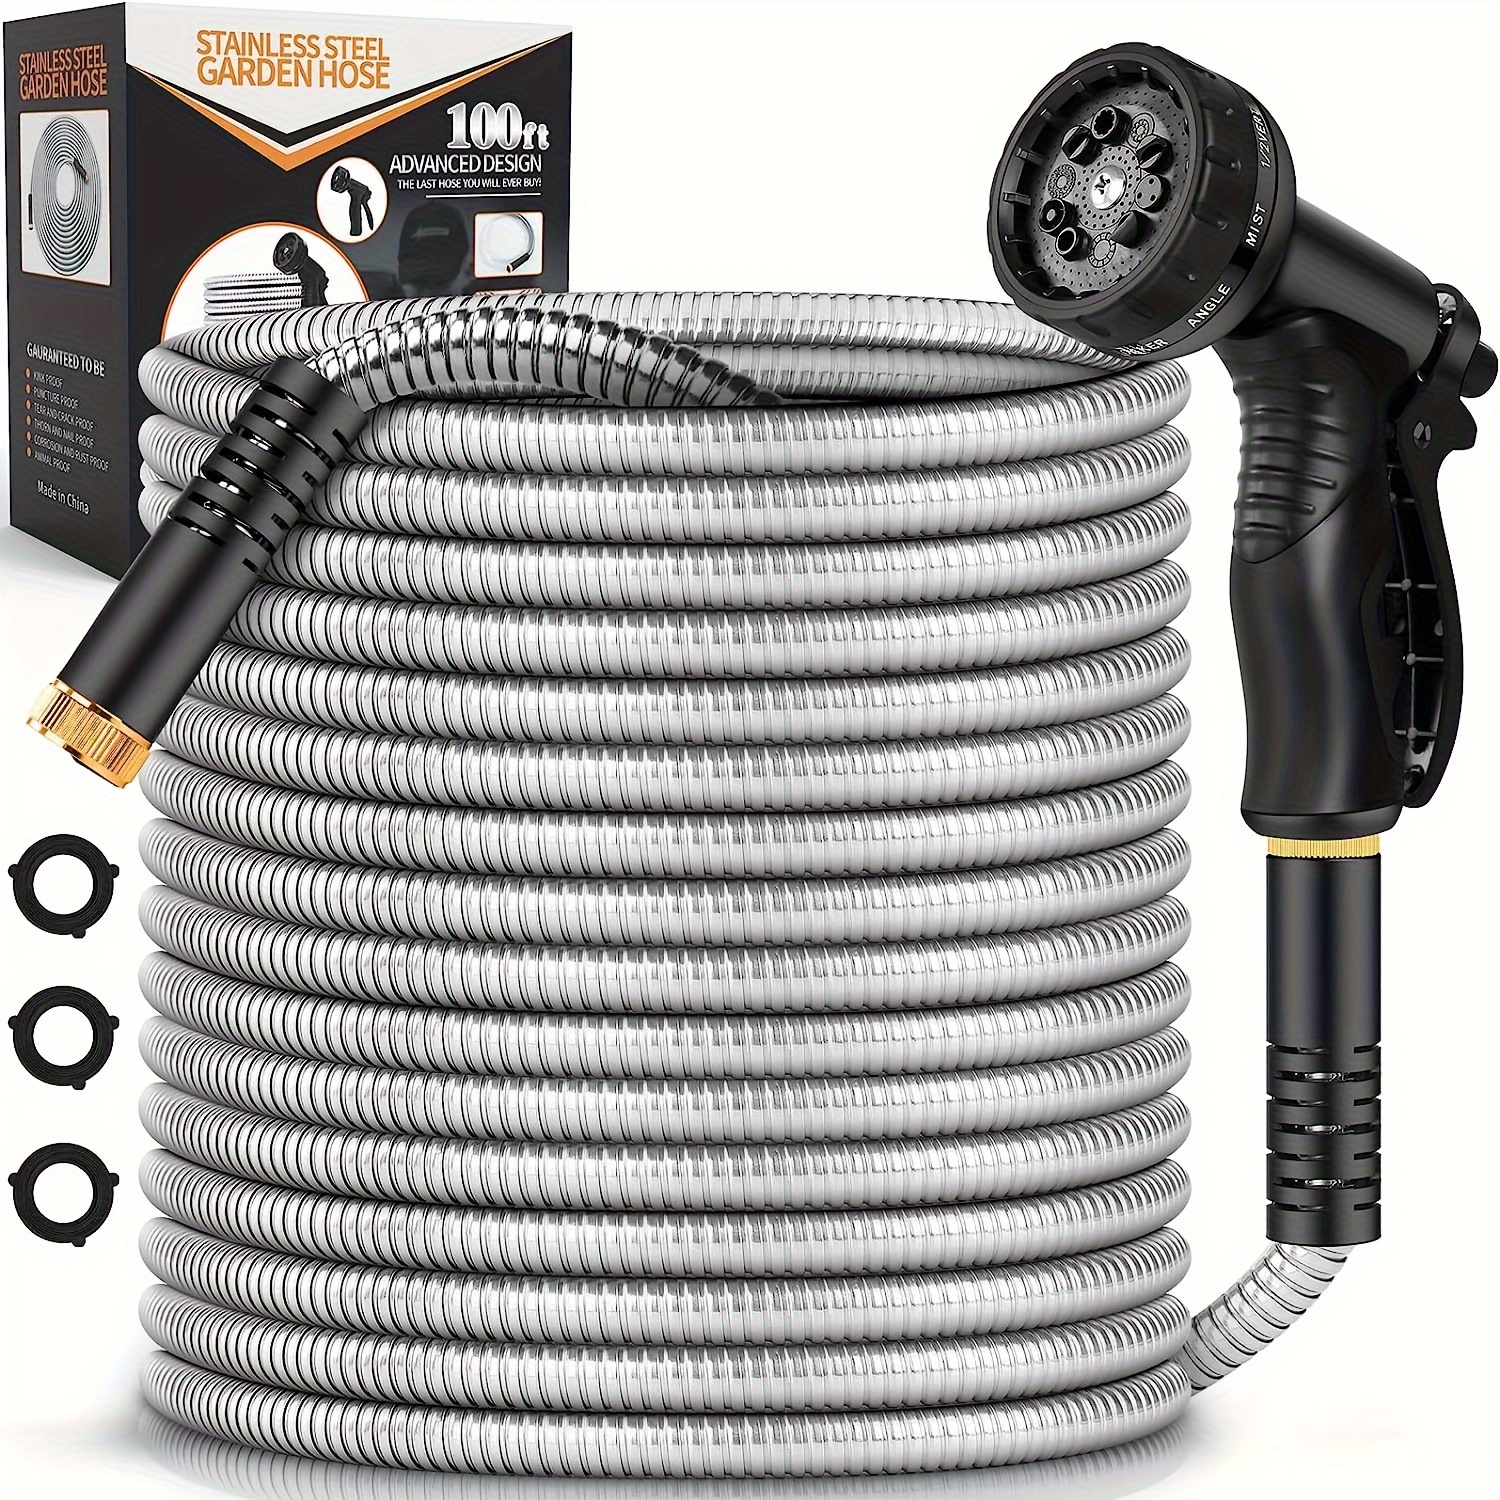 

75ft & 100ft 304 Stainless Steel Garden Hose - Durable, Flexible, No Kink, Pet Proof With High-pressure 10-function Nozzle - Ideal For Yard And Outdoor Watering